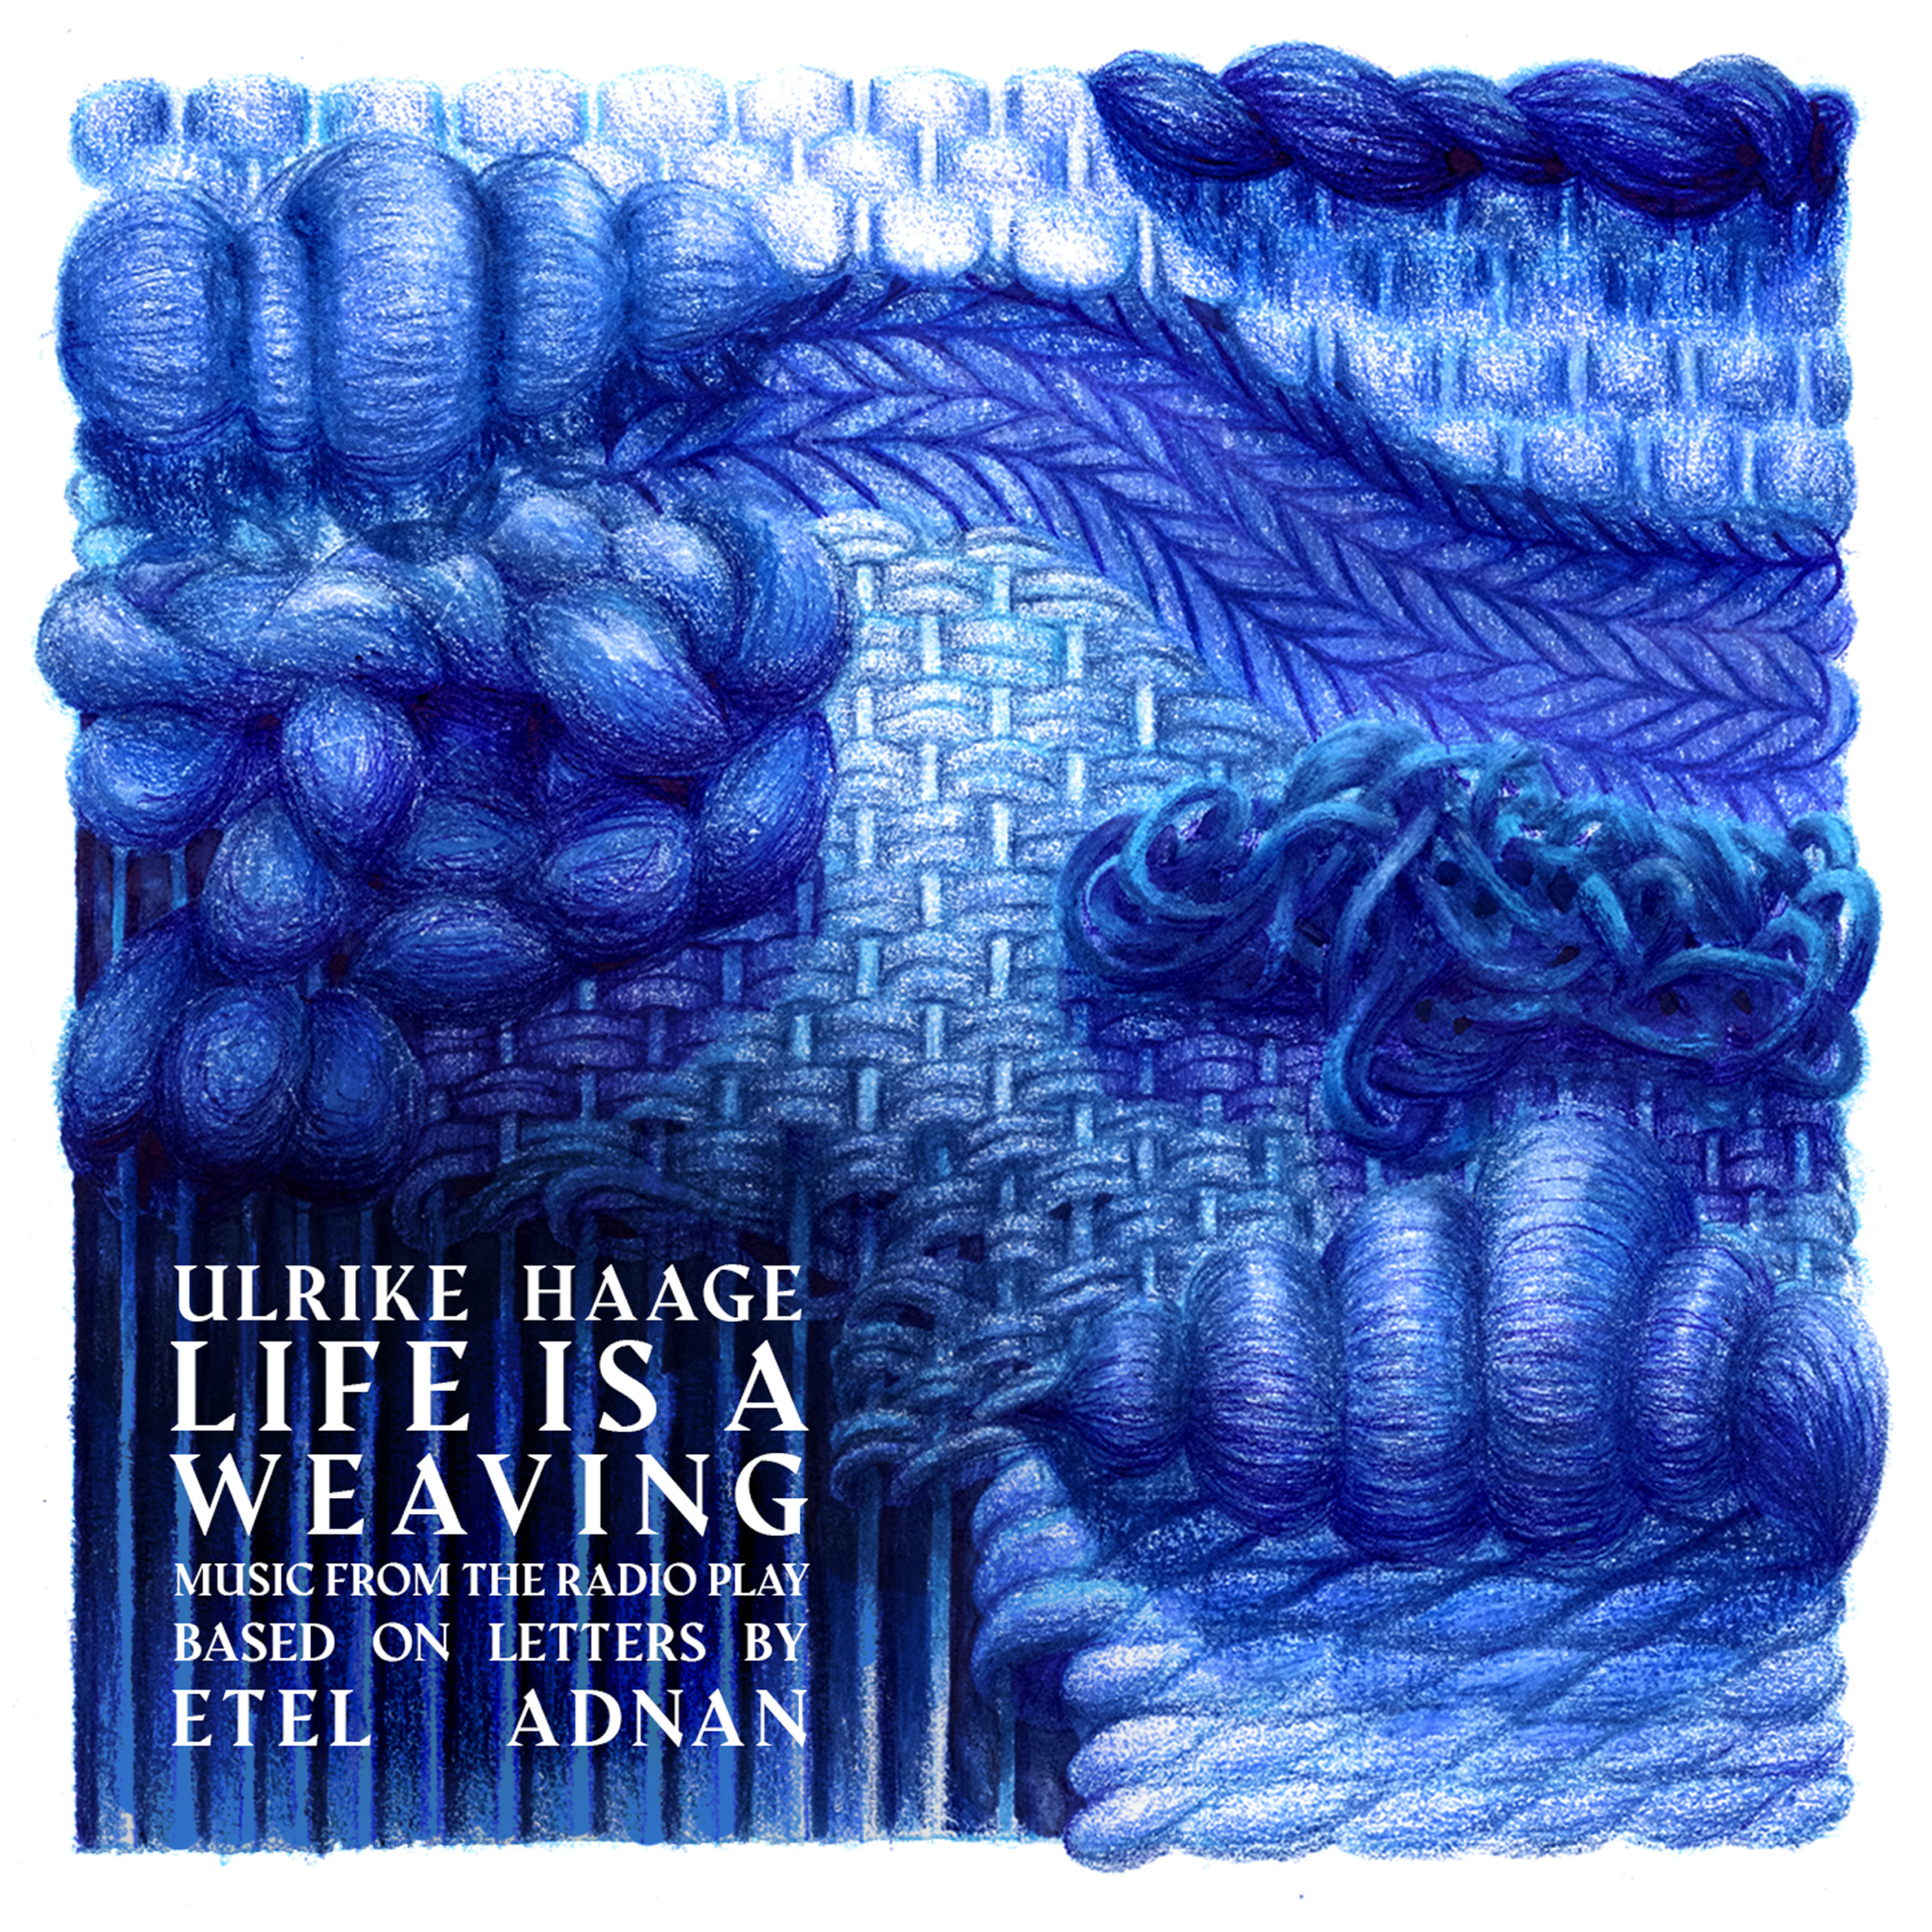 LIFE IS A WEAVING